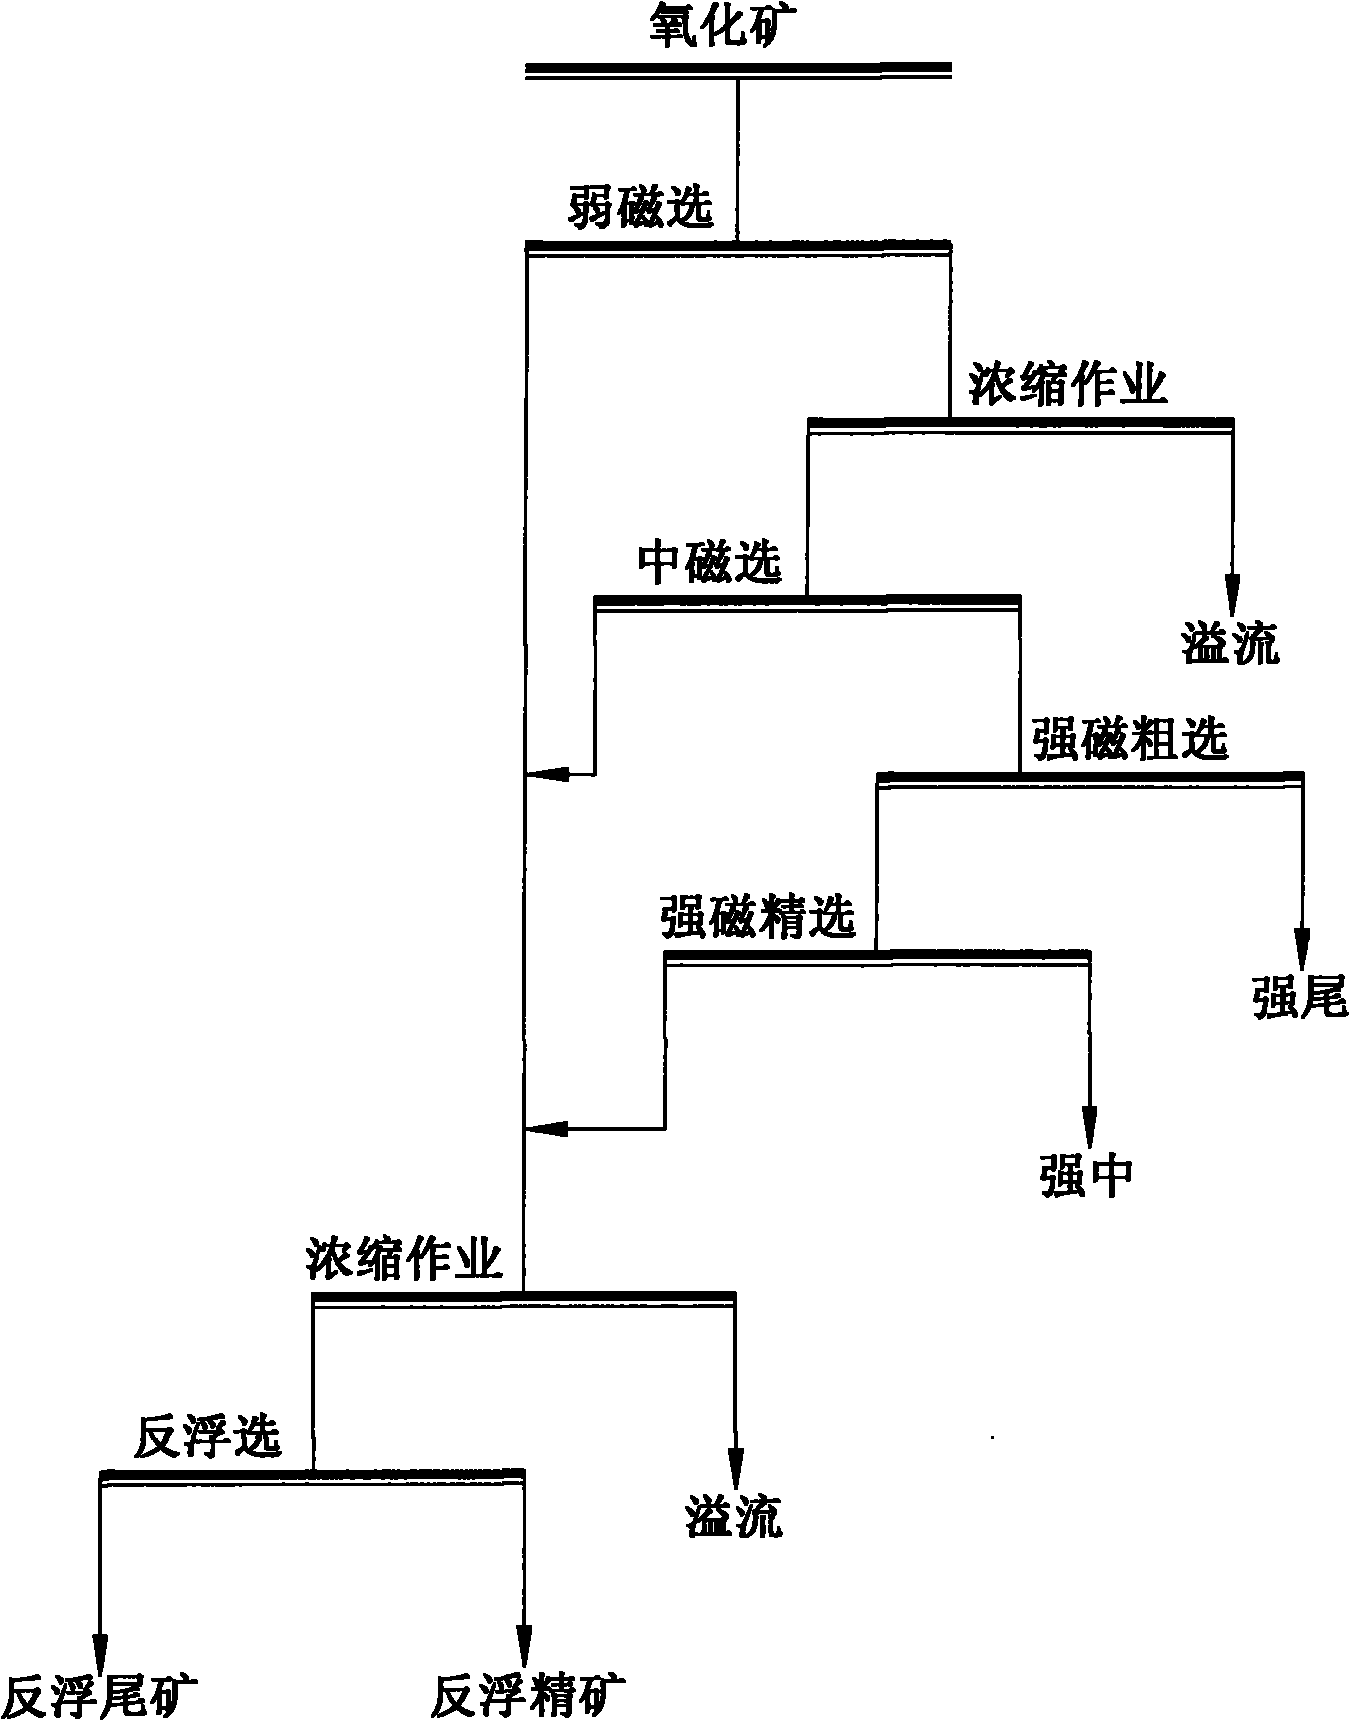 Mine-processing process for extracting iron, reducing fluorine and reducing potassium and sodium of oxide iron ore with high fluorine and high potassium and sodium